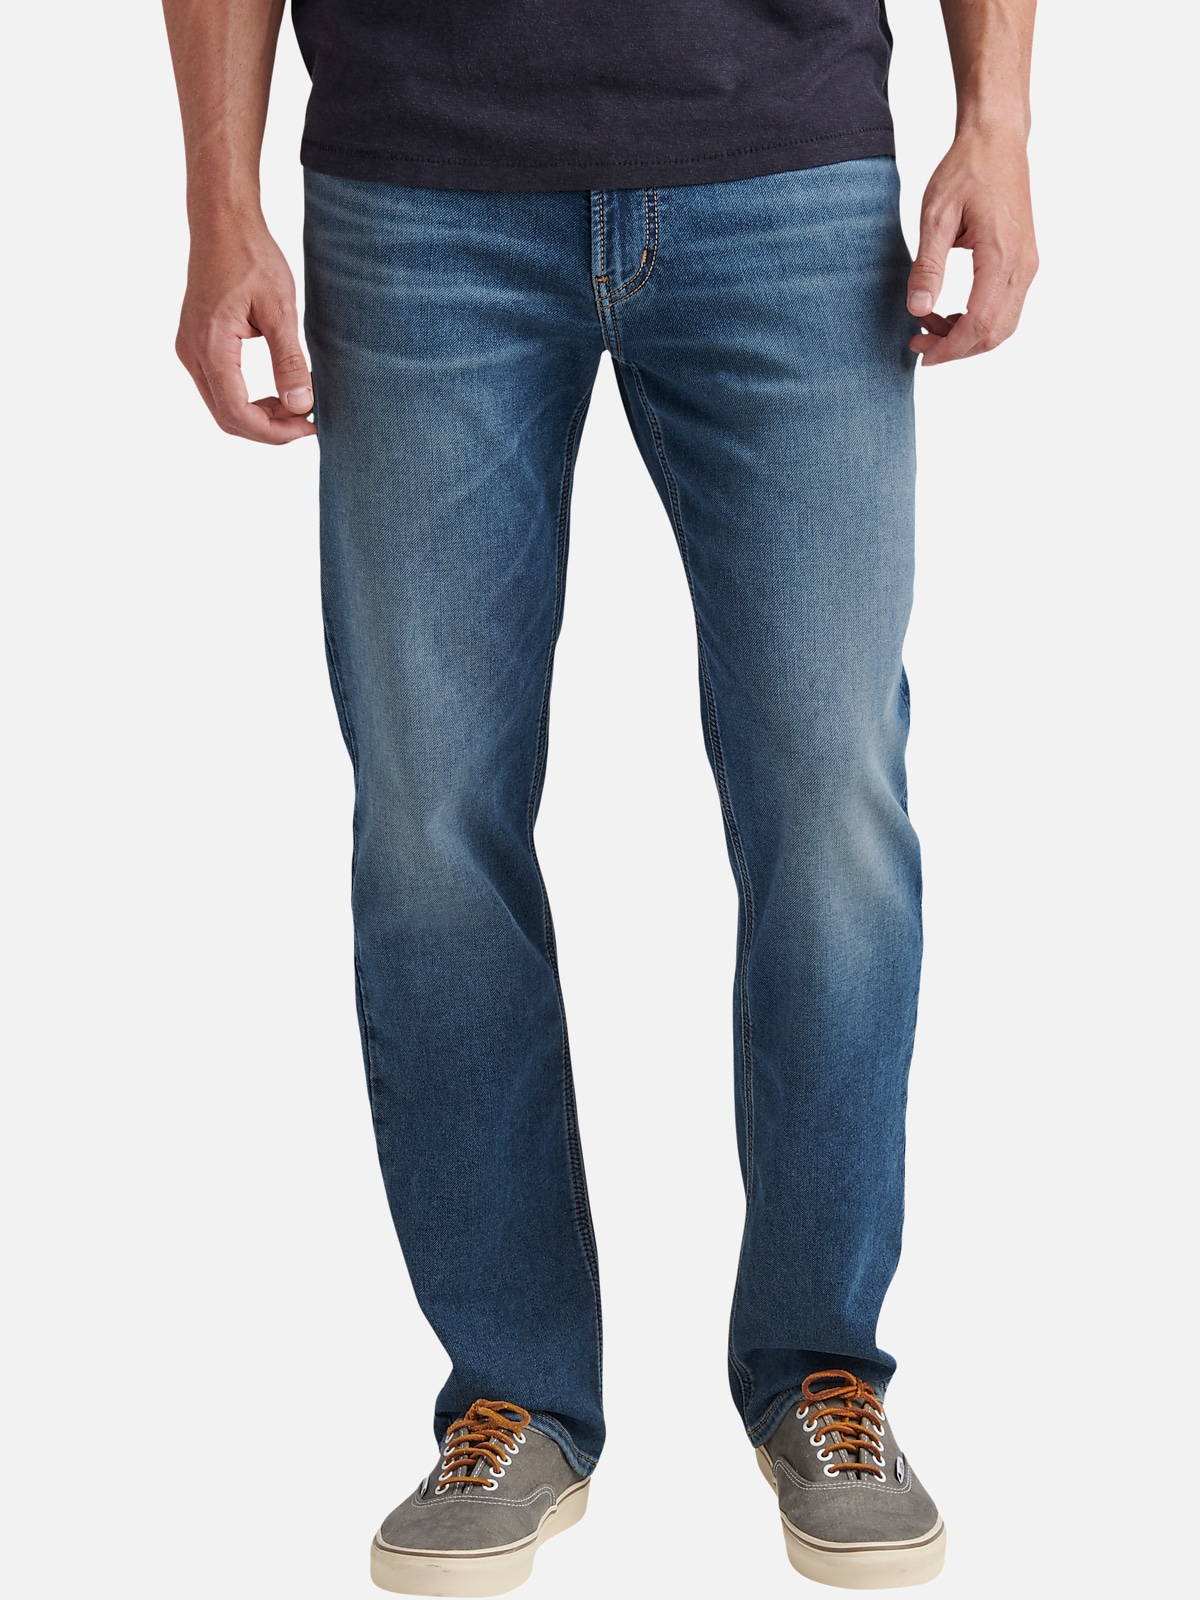 Silver Jeans Zac Relaxed Fit Straight Leg Jeans | All Clearance $39.99 ...